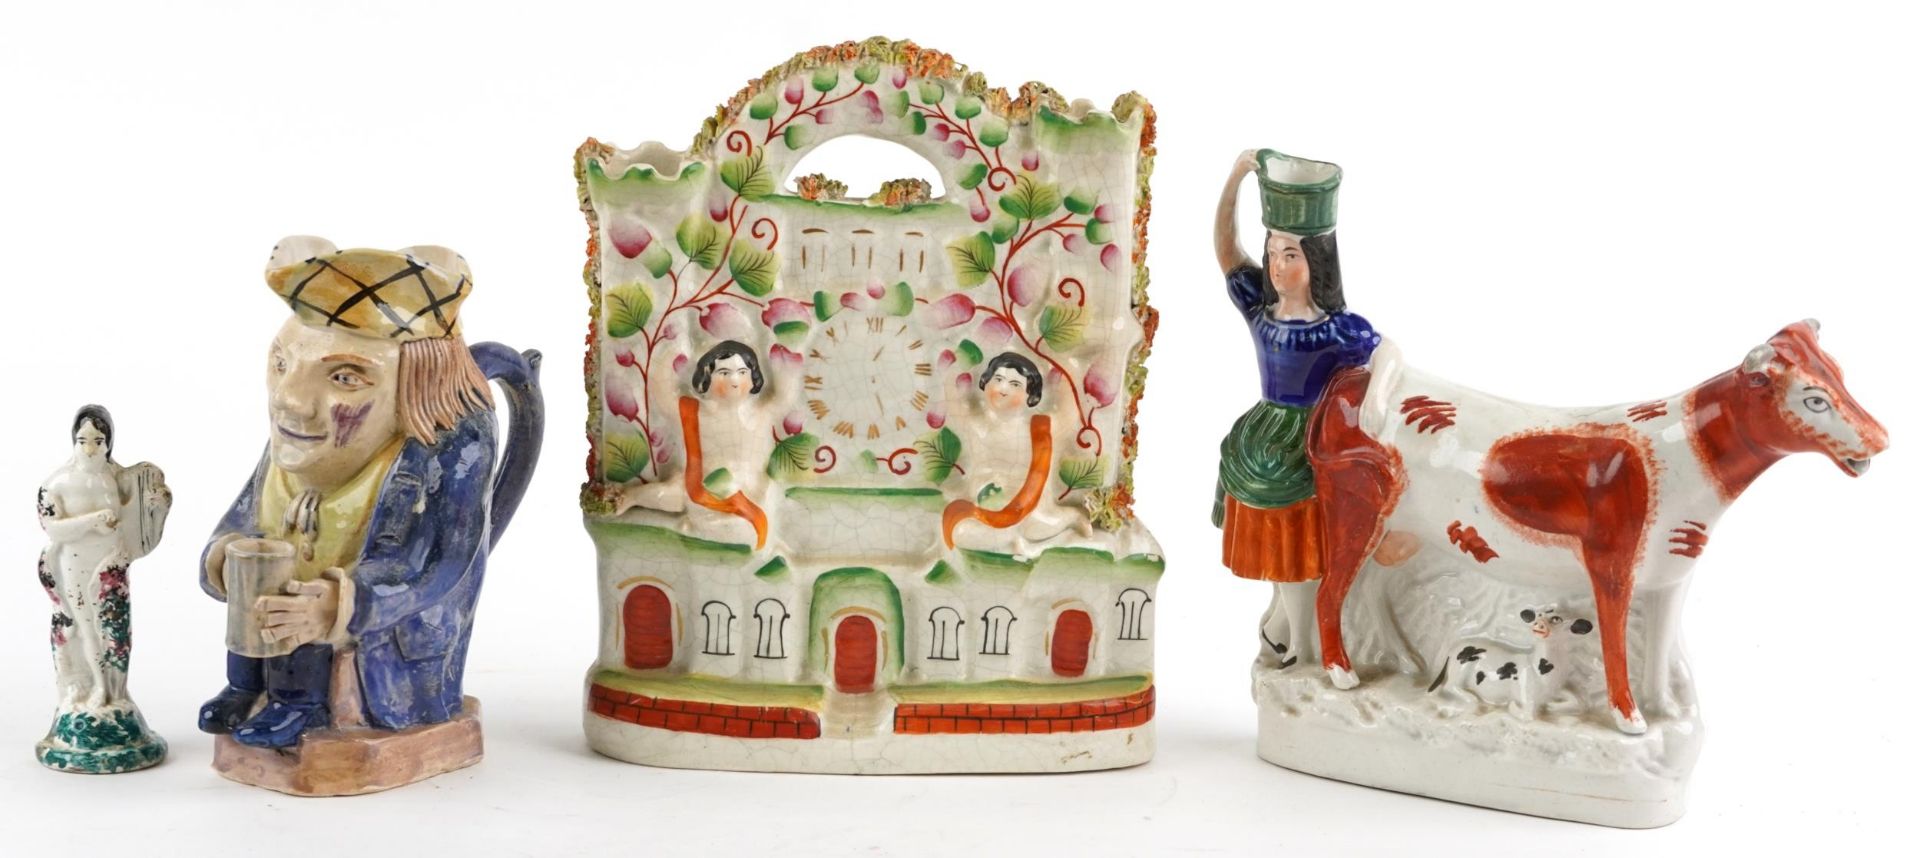 18th century and later English ceramics including a Prattware figure of Venus and character jug, the